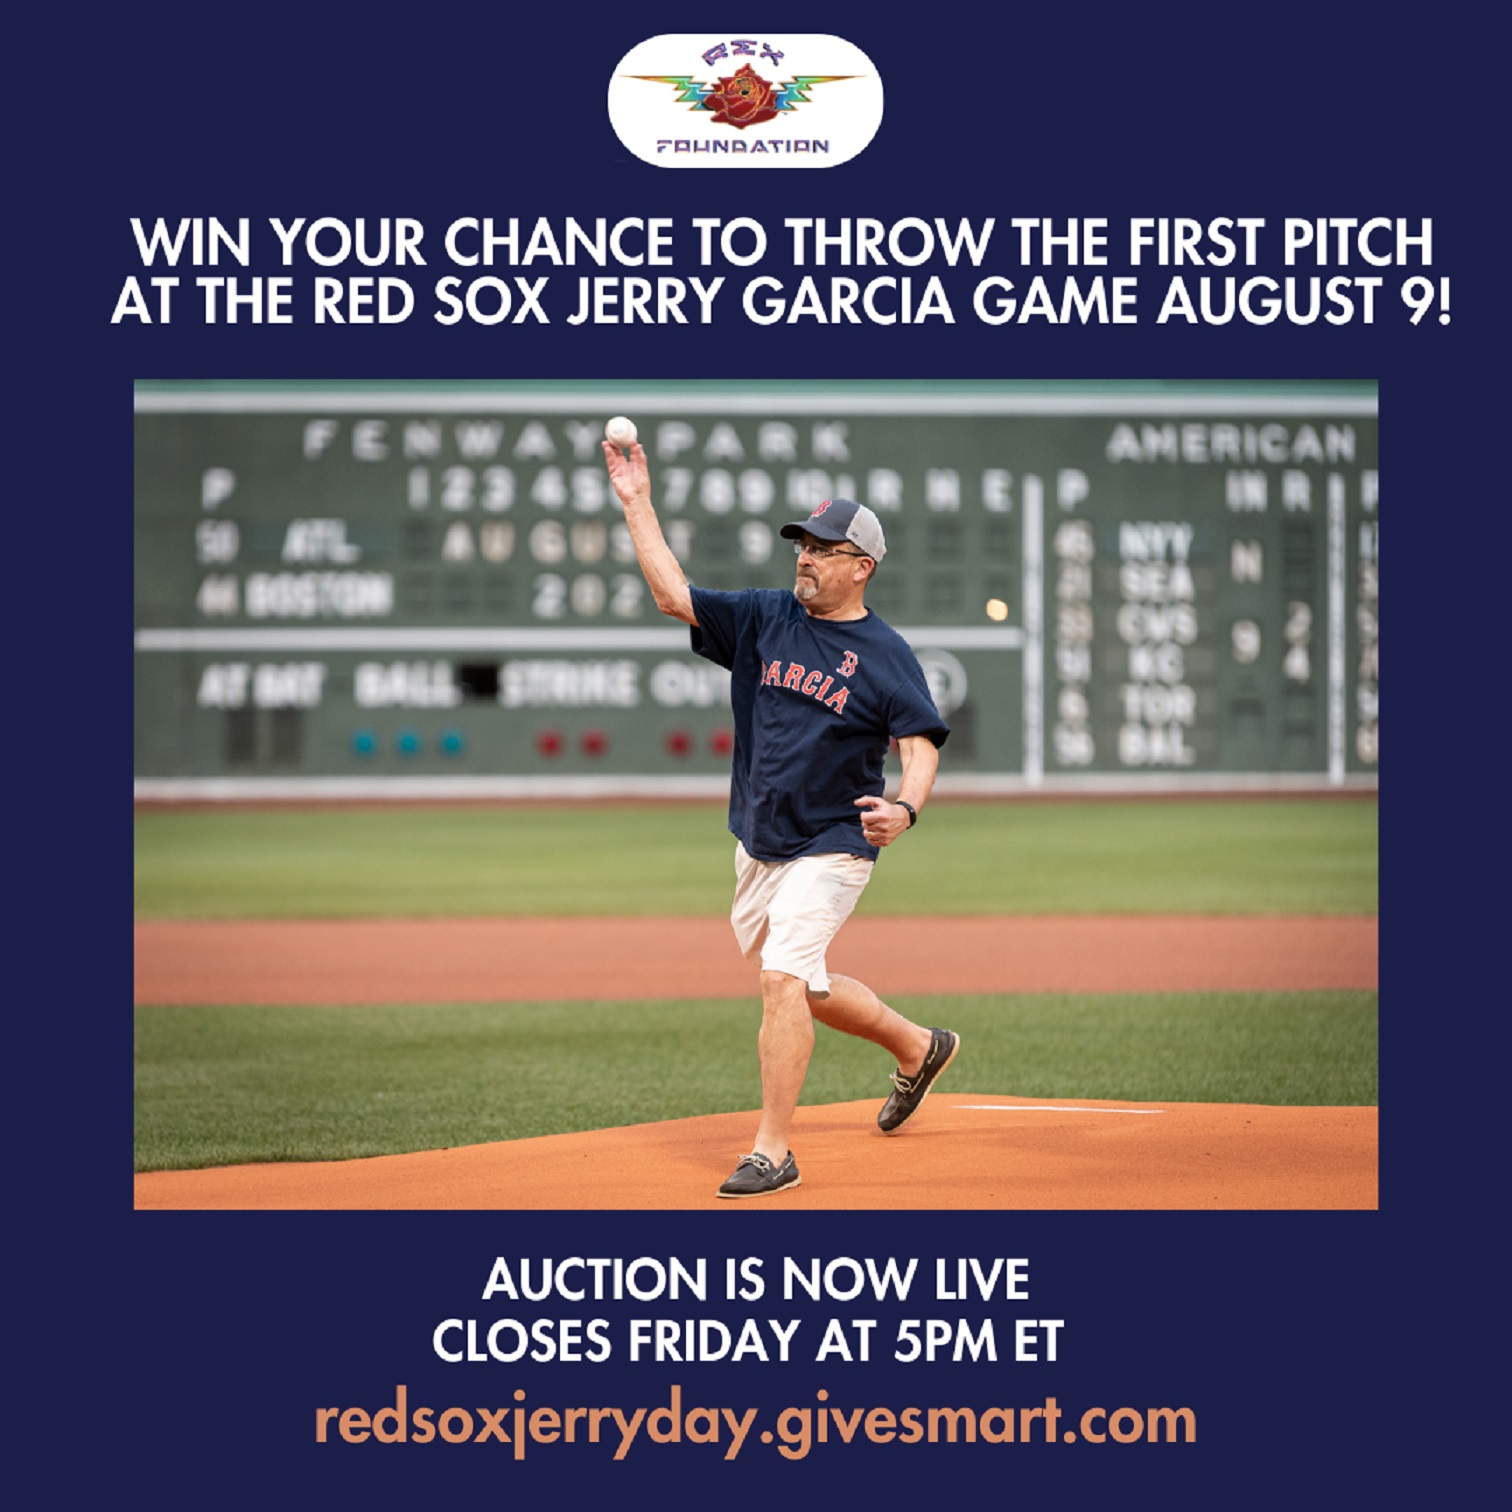 Win Your Chance to Throw the First Pitch August 9 at Fenway ParK